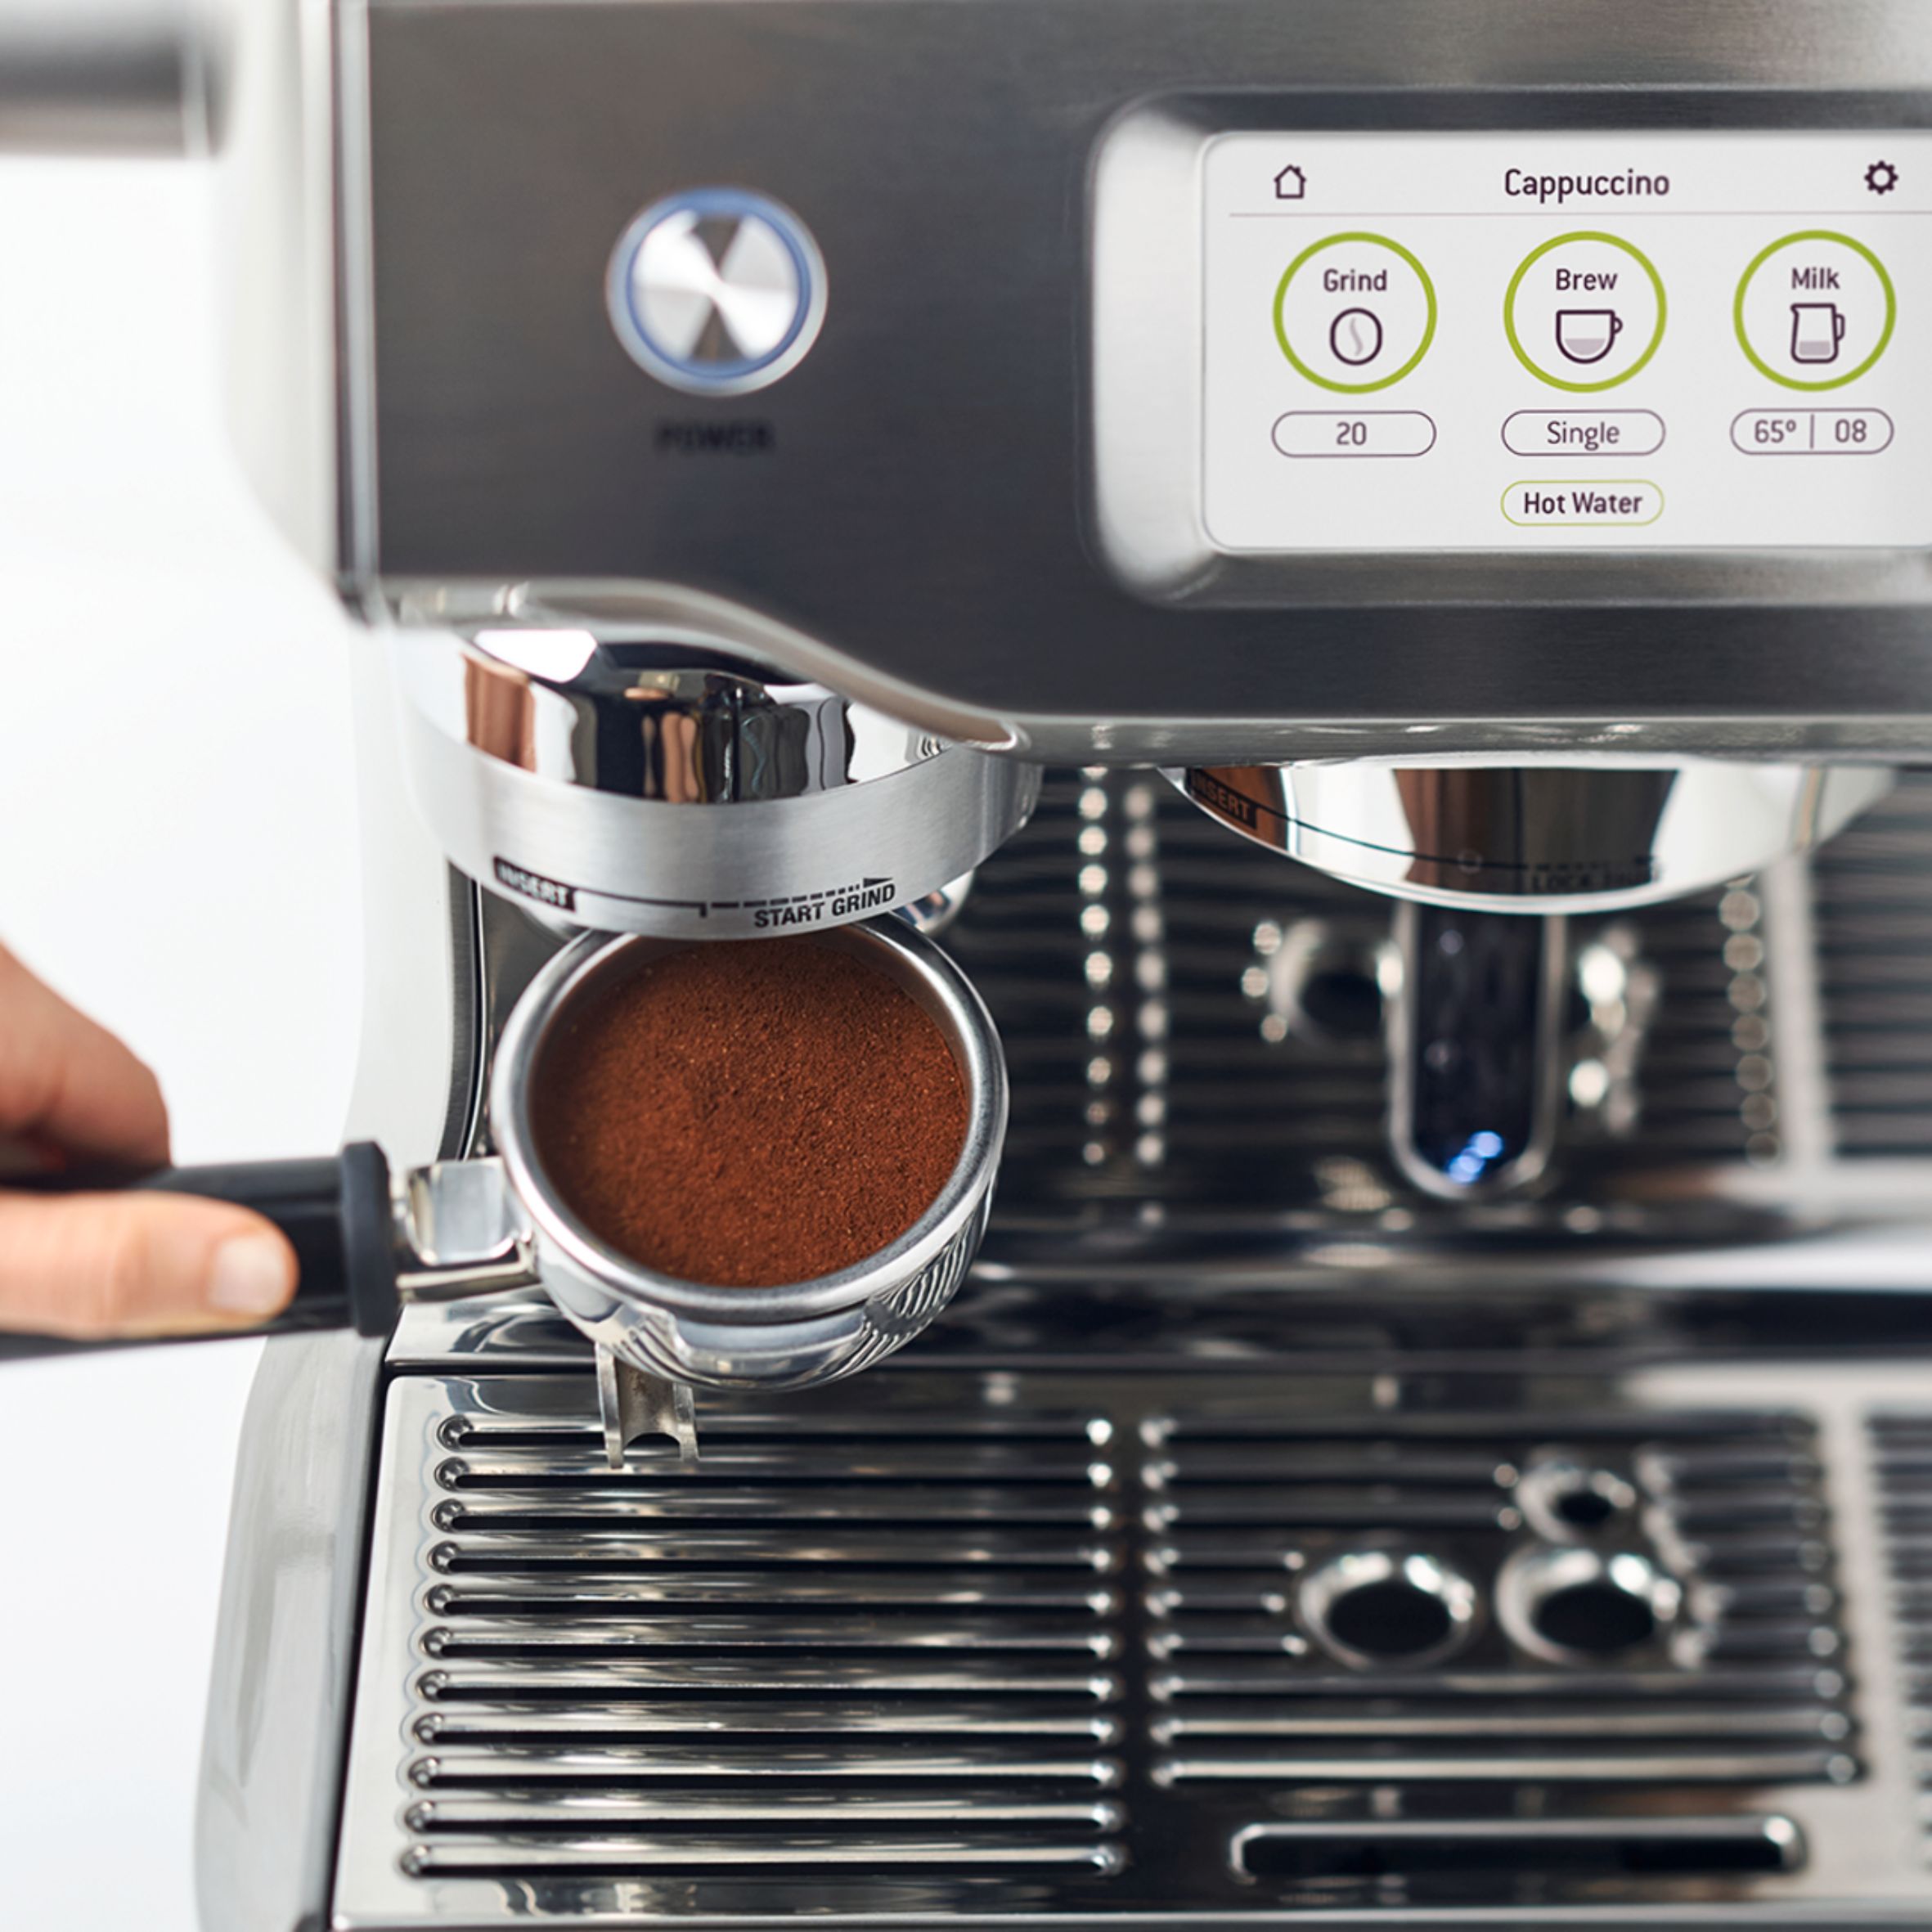 Breville Barista Touch Impress Espresso Machine Brushed Stainless Steel  BES881BSS1BNA1 - Best Buy